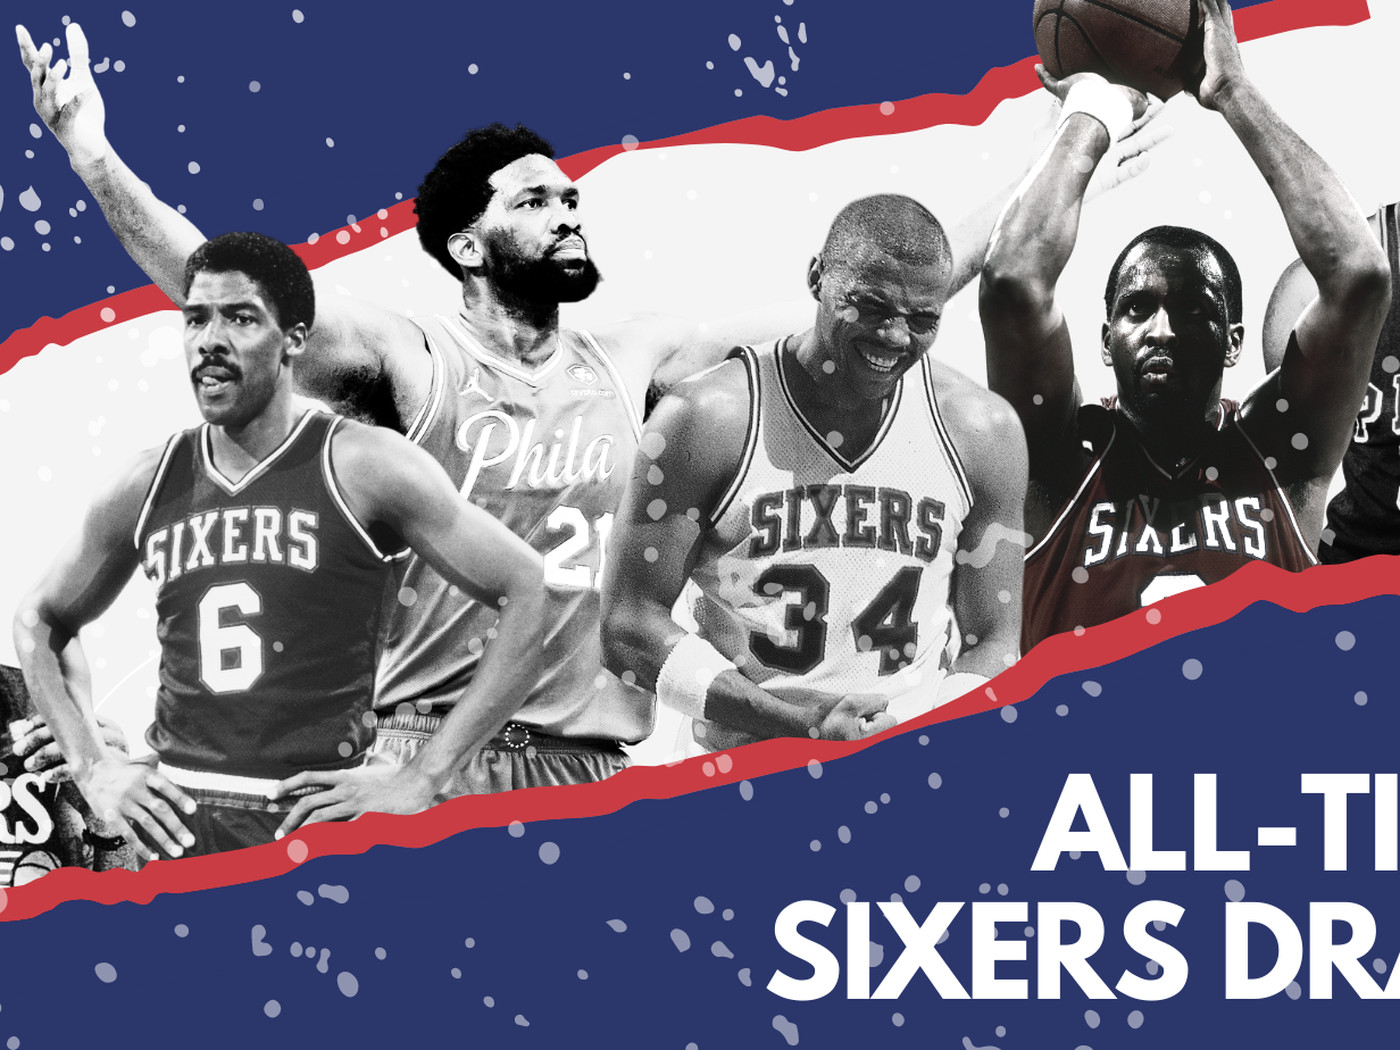 Drafting the All-Time Sixers team: four writers compete to build a